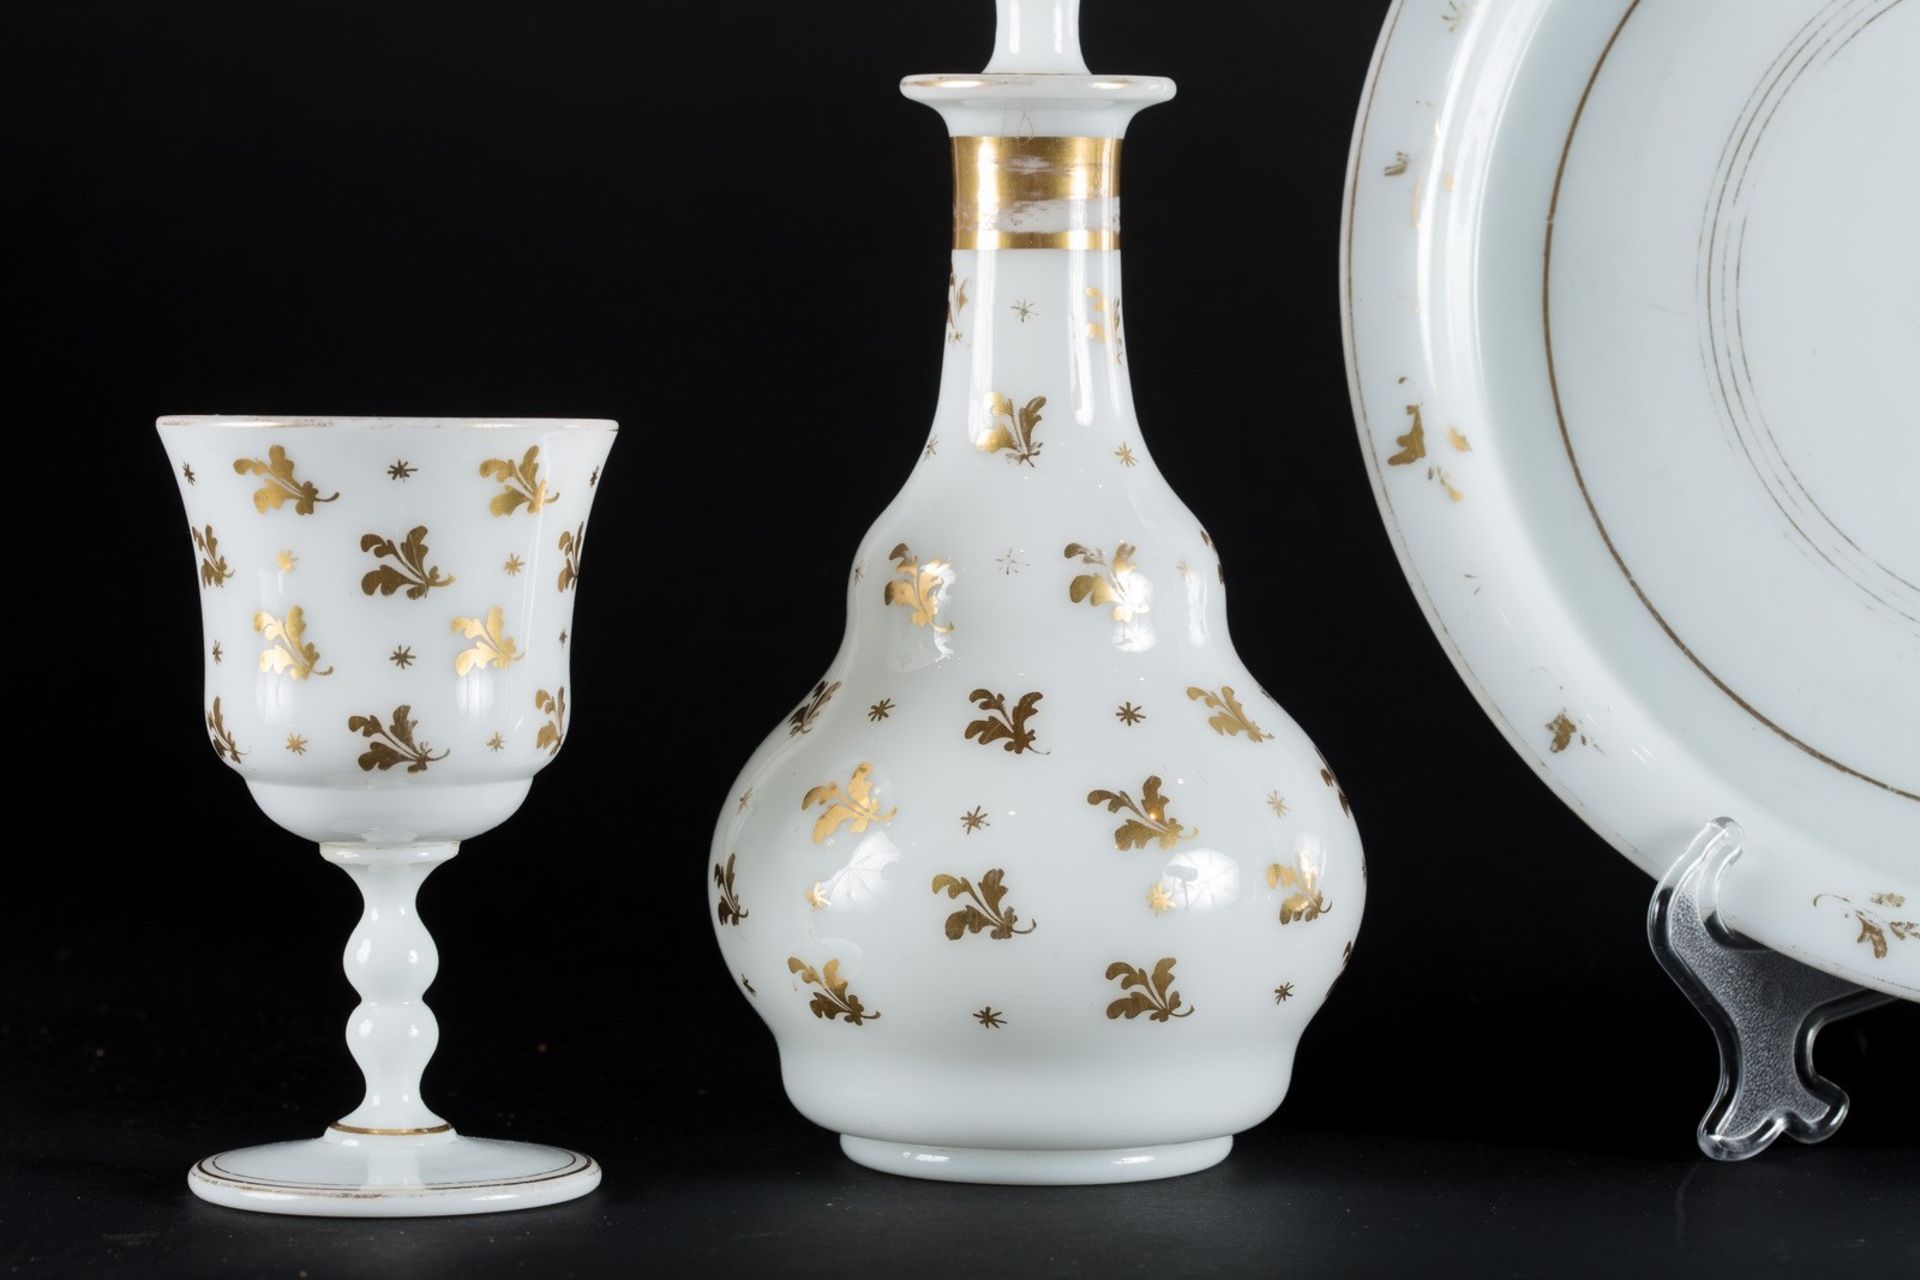 Arte Islamica A Beykoz white opaline glass night set with gilded floral decoration Turkey, 19th cen - Image 2 of 4